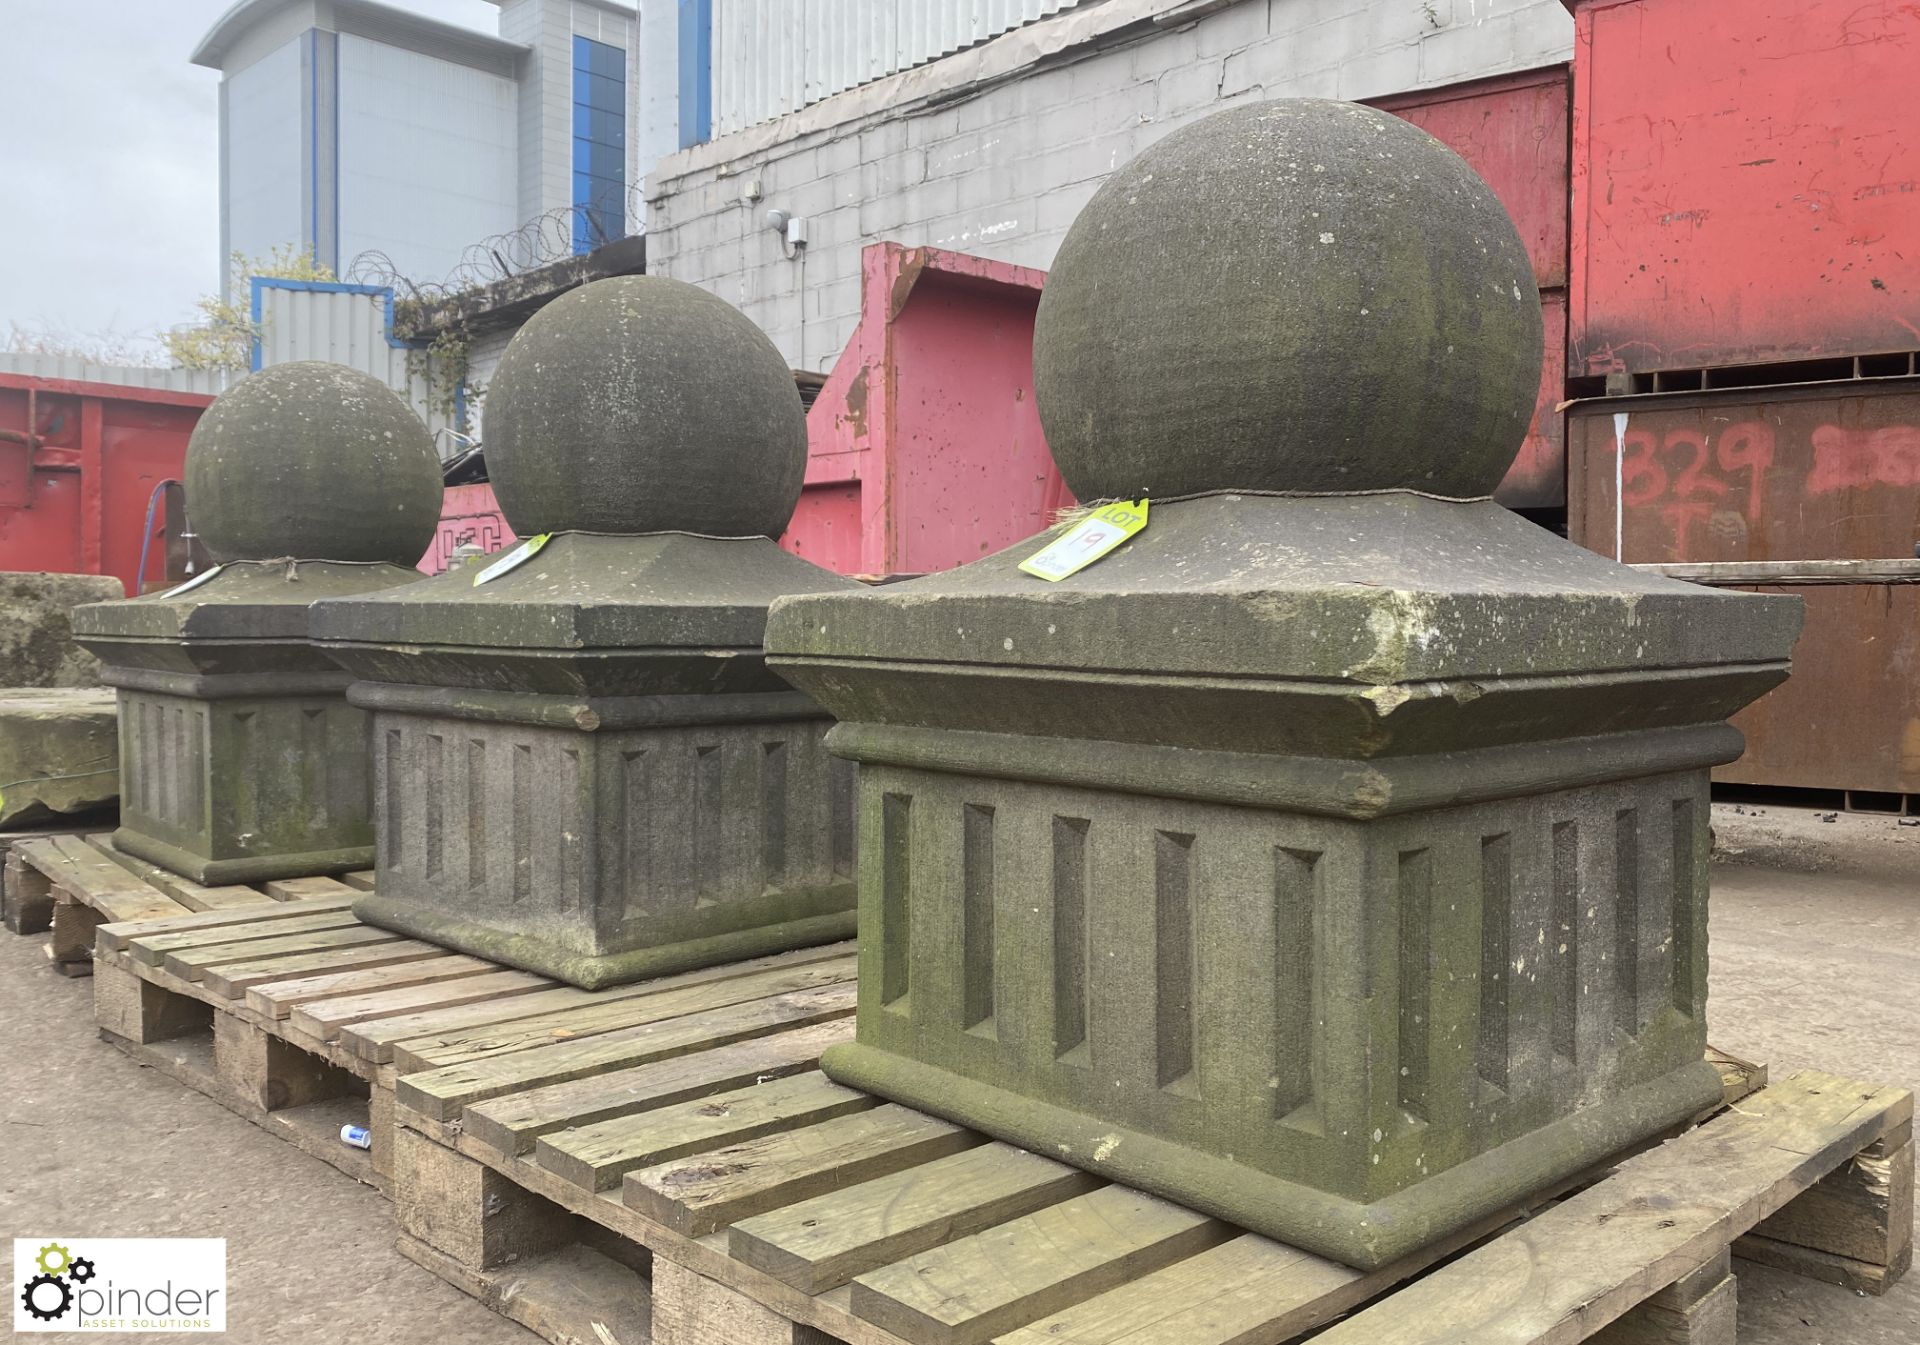 Set 3 Yorkshire stone Gate Post Pier Caps, with ball top, base 600mm x 600mm, 900mm tall